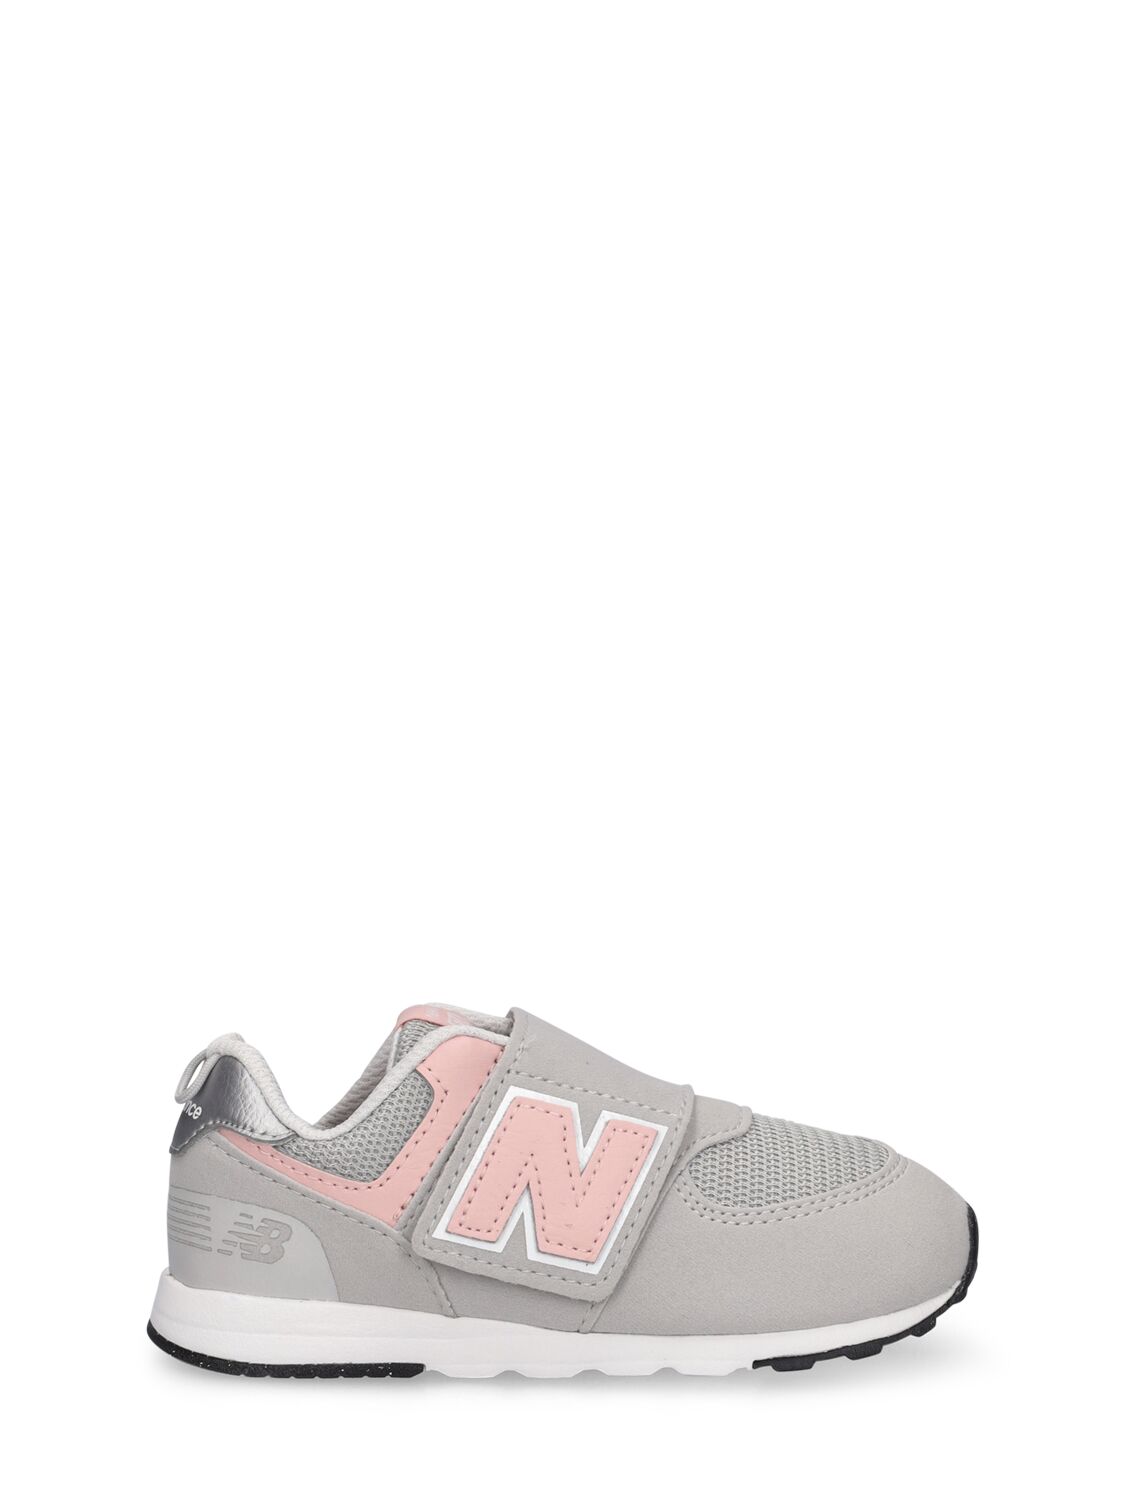 NEW BALANCE 574 FAUX LEATHER SNEAKERS